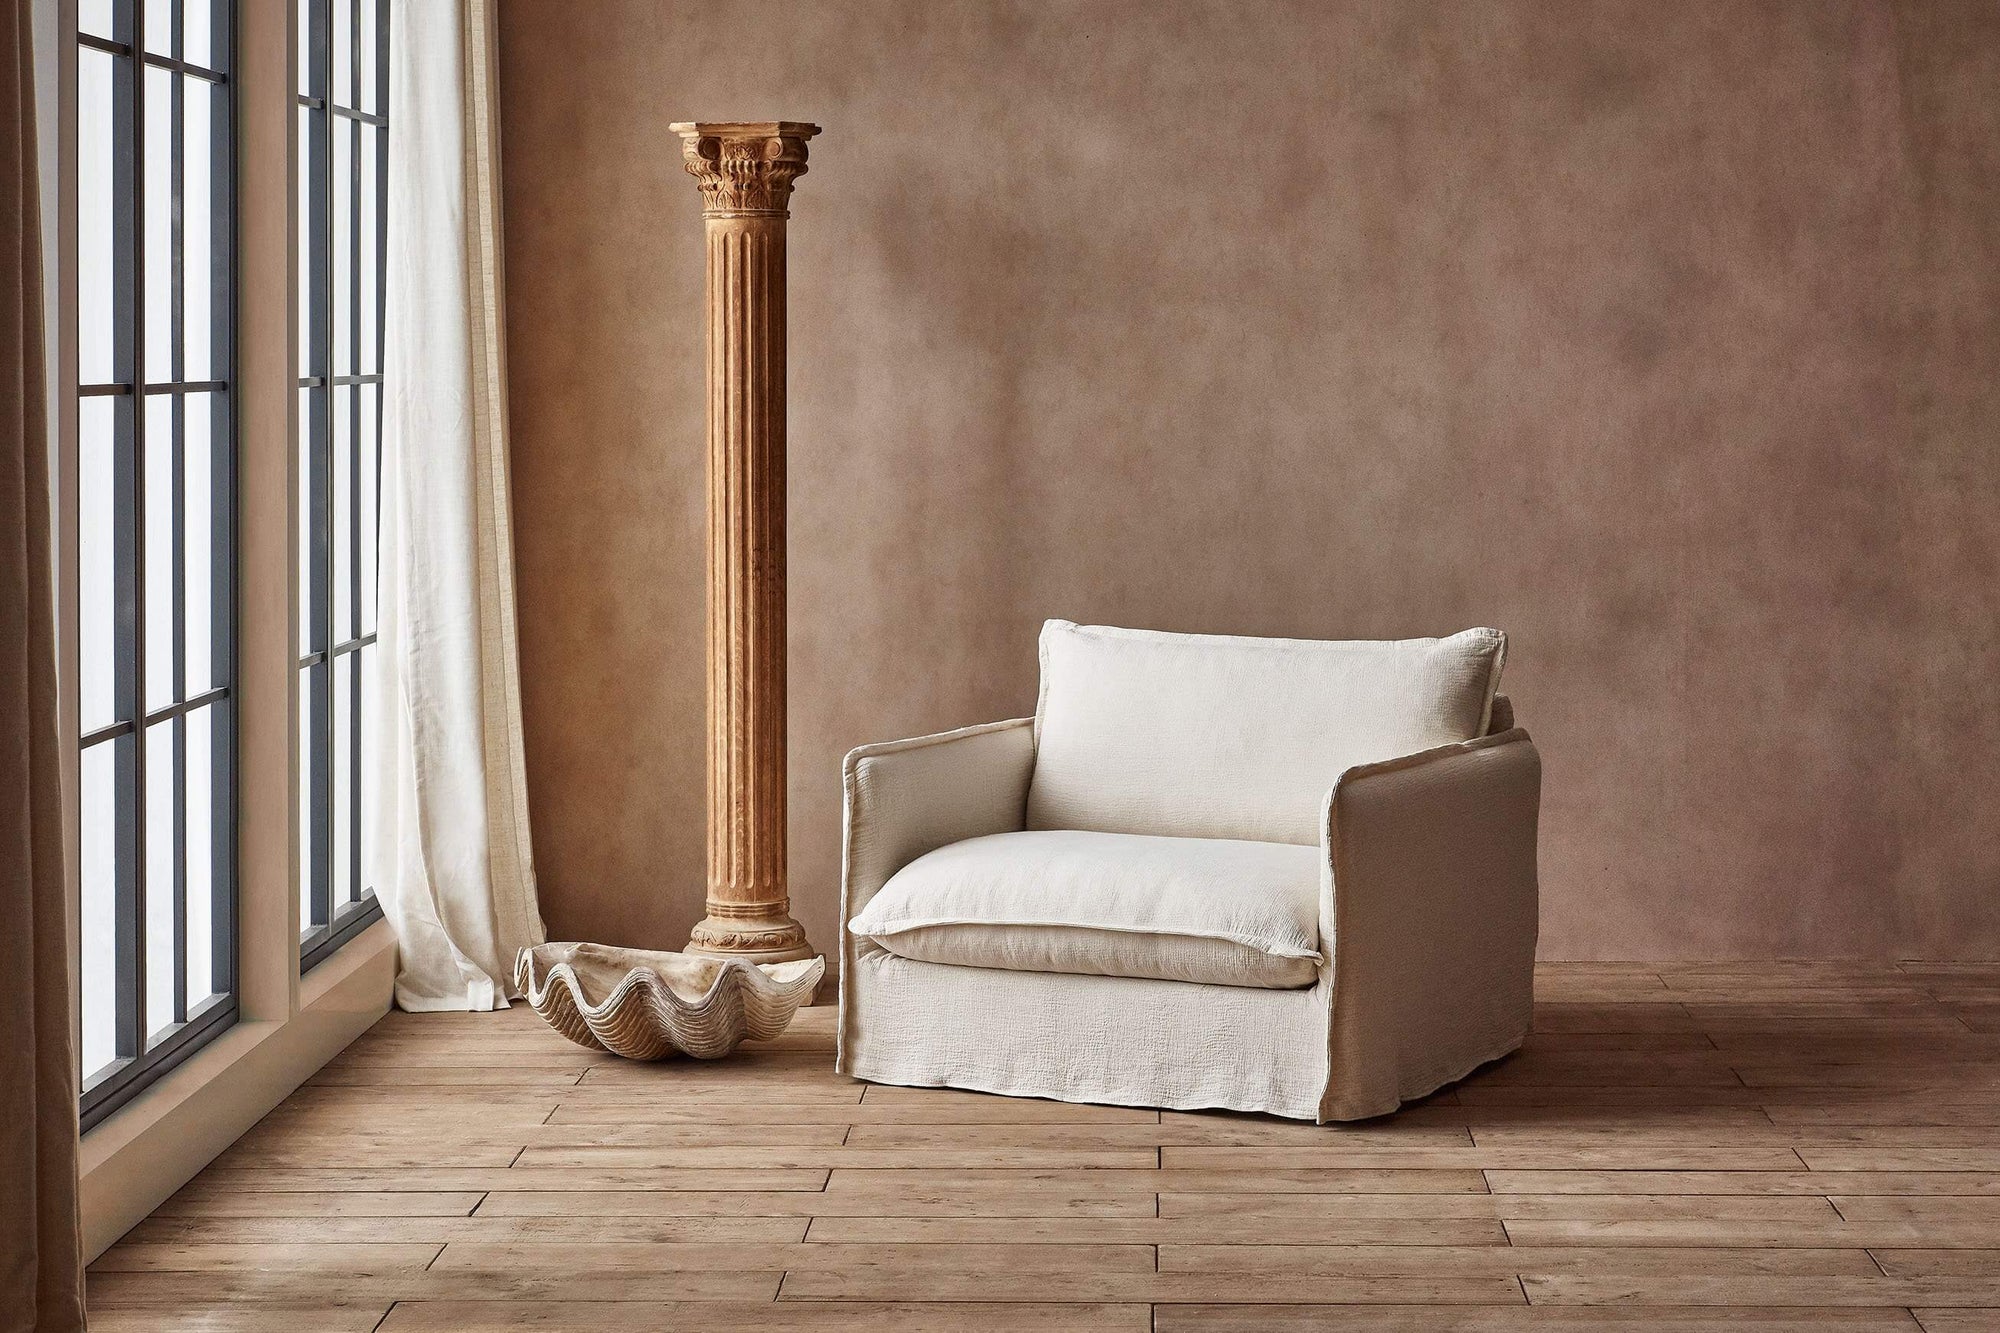 Neva Chair in Corn Silk, a light beige Washed Cotton Linen, placed in a sunlit room next to a decorative pillar